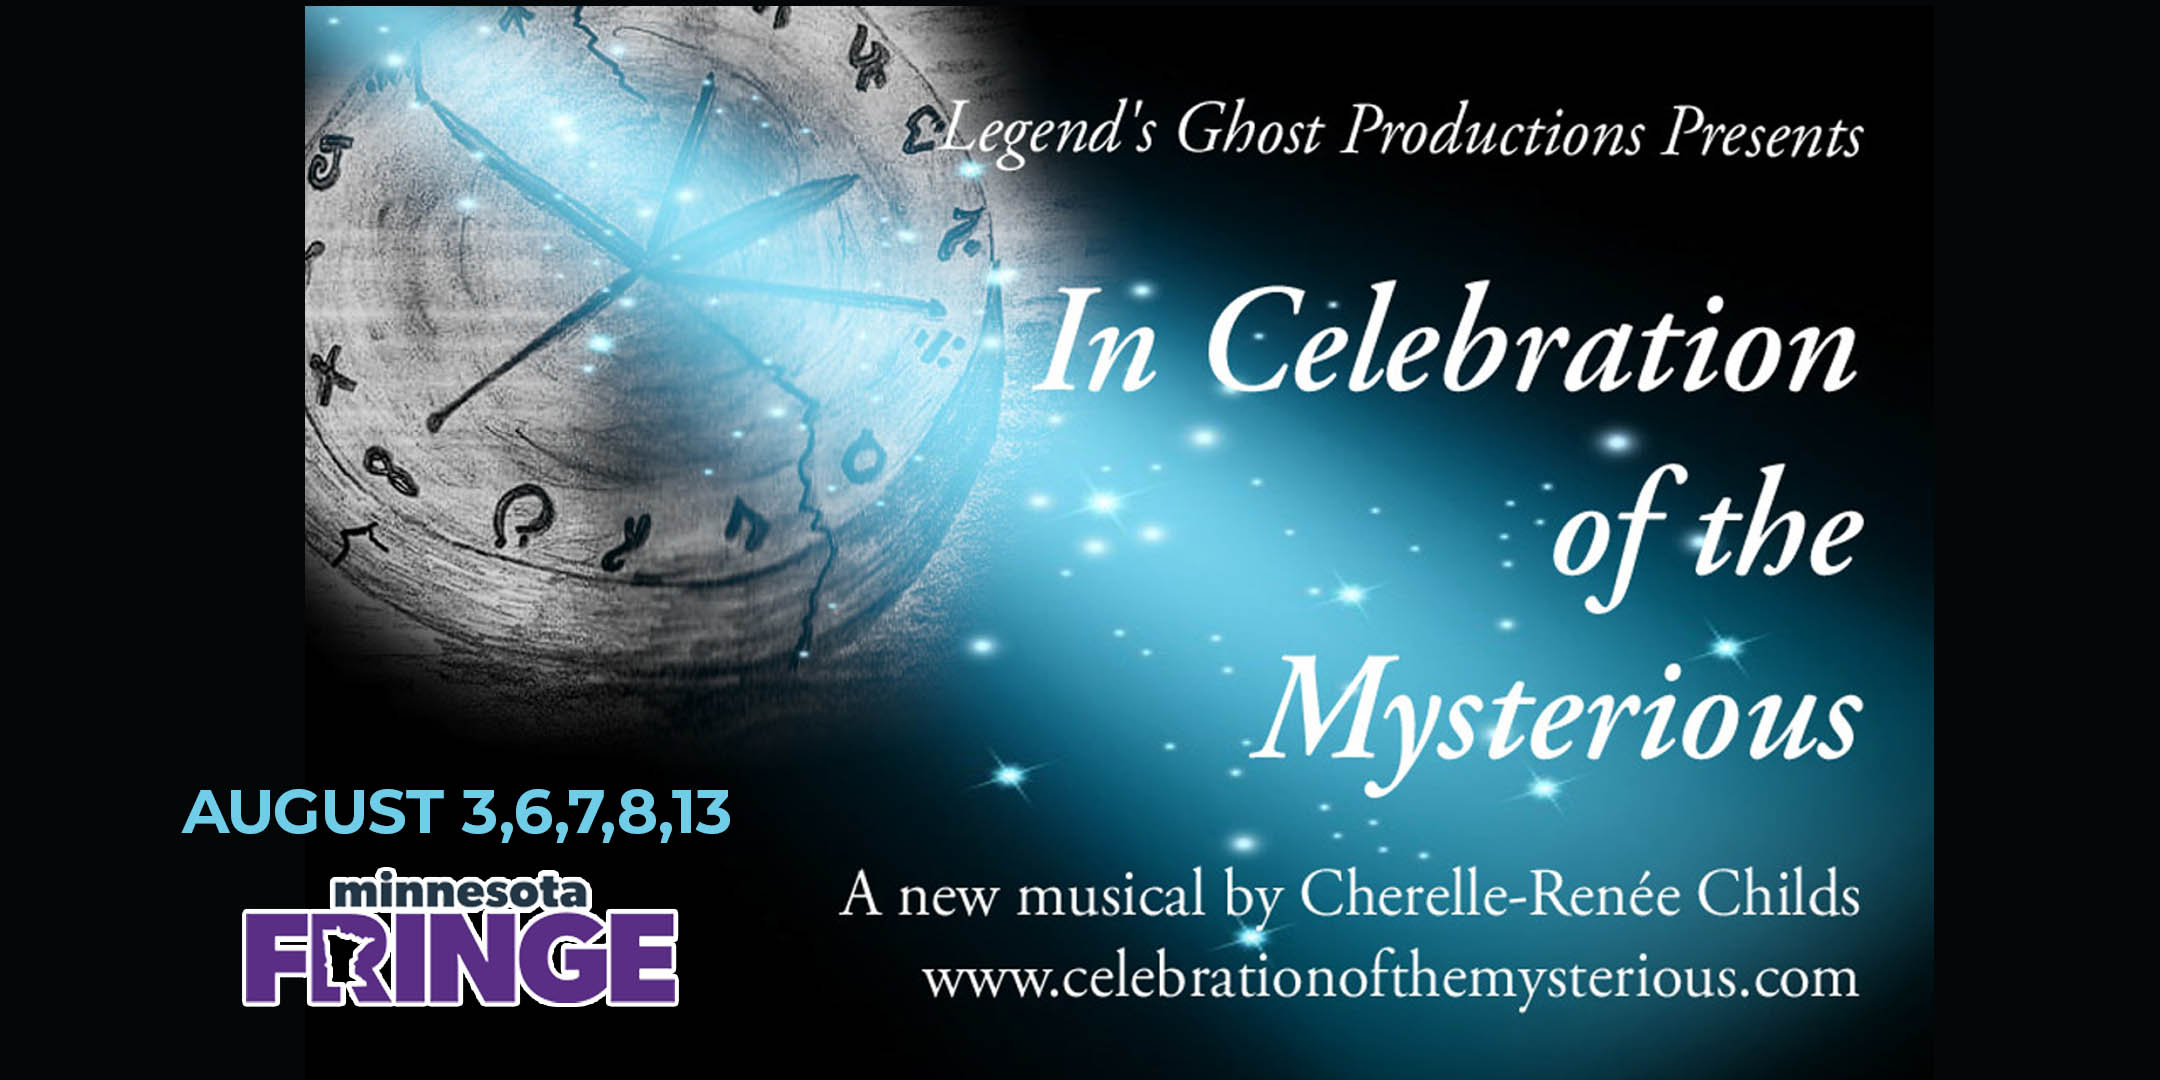 Minnesota FRINGE presents In Celebration of the Mysterious By Legend's Ghost Productions Created by Cherelle-Renée Childs Thursday, August 3 The Hook and Ladder Theater Doors 6:30pm :: Show 7:00pm :: 7-11 and Up General Admission: $18